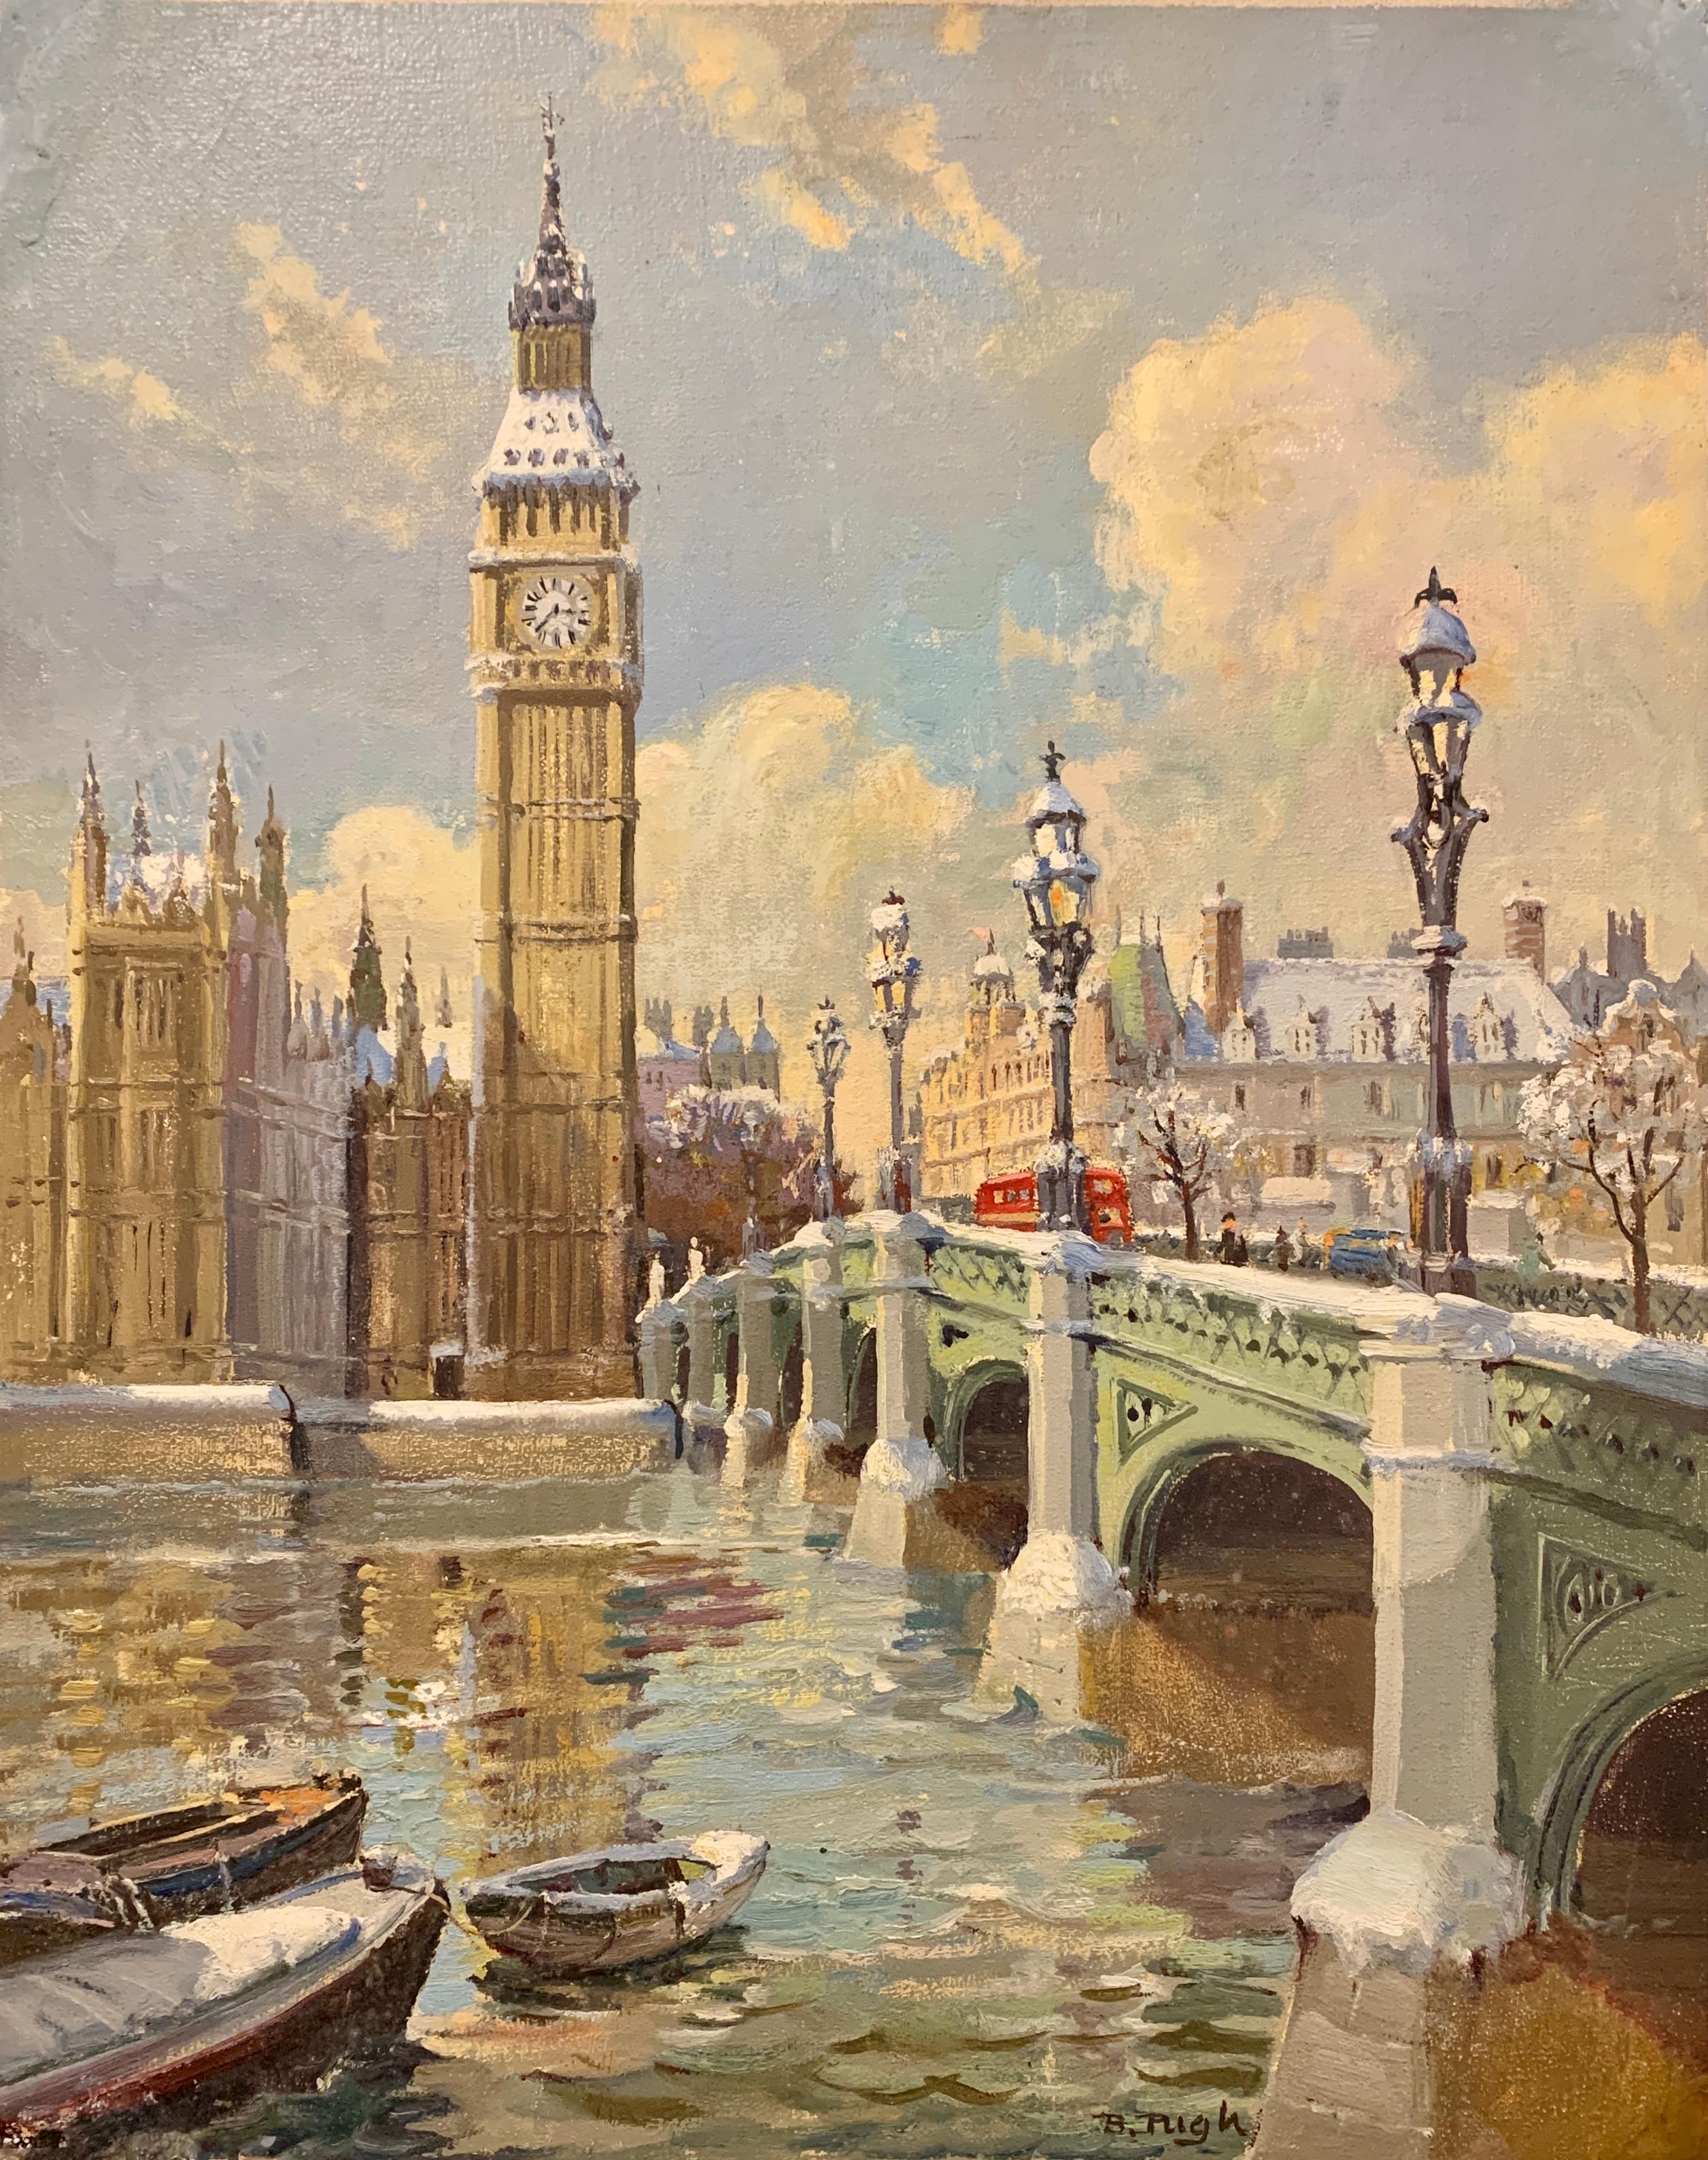 Big Ben in London with London Bridge in the snow, by the River Thames, England - Painting by Bert Pugh